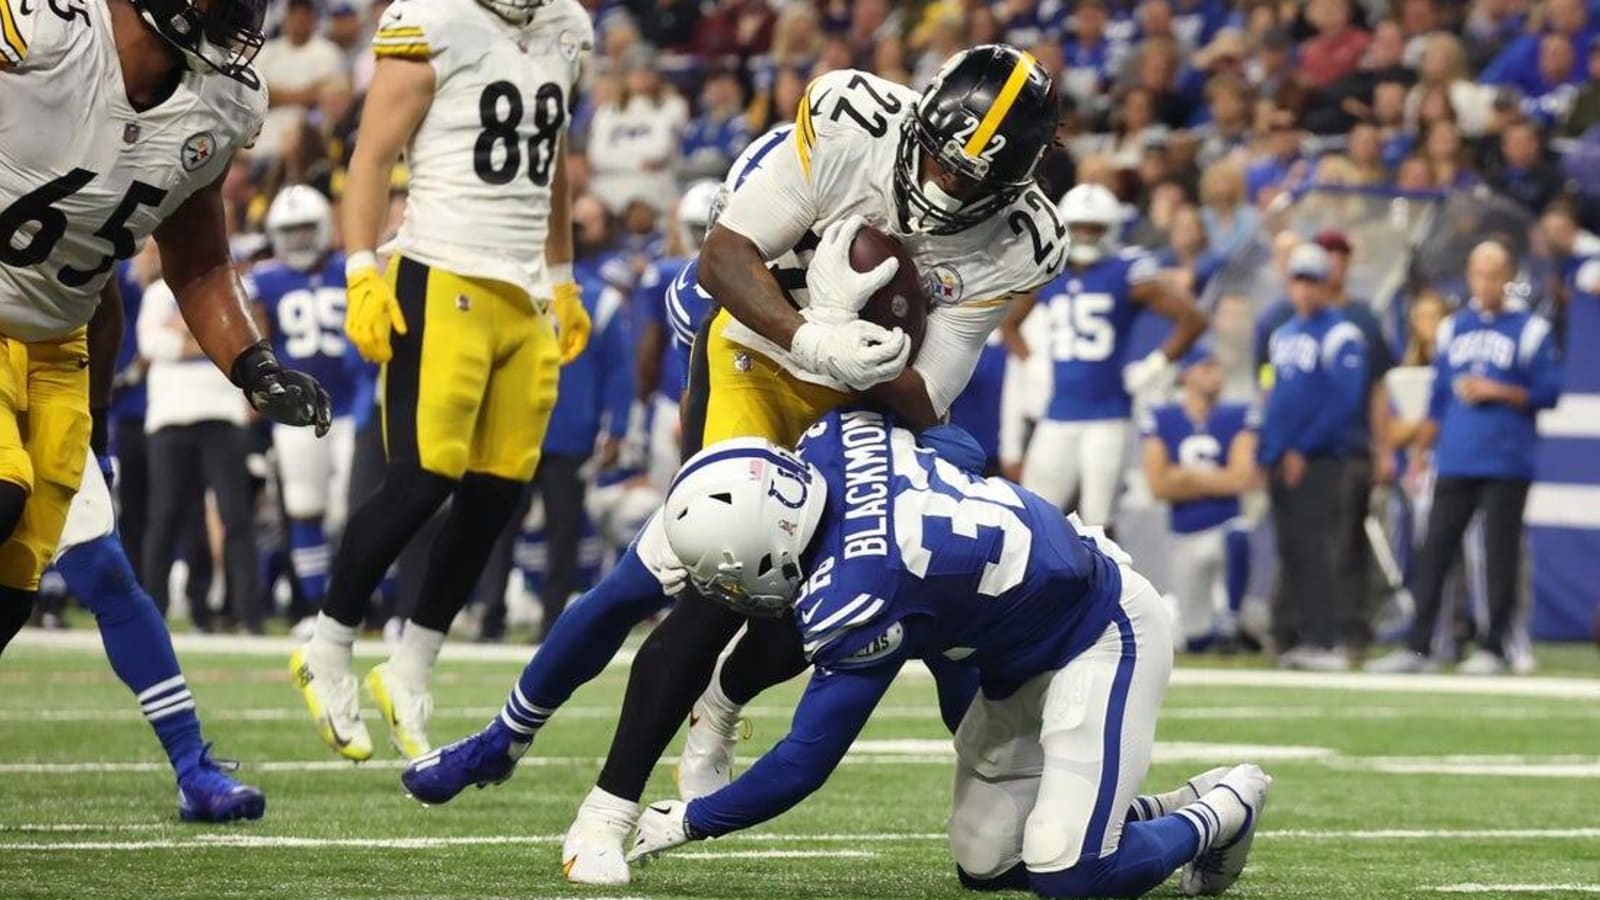 Steelers lose 13-point lead, rally to defeat Colts